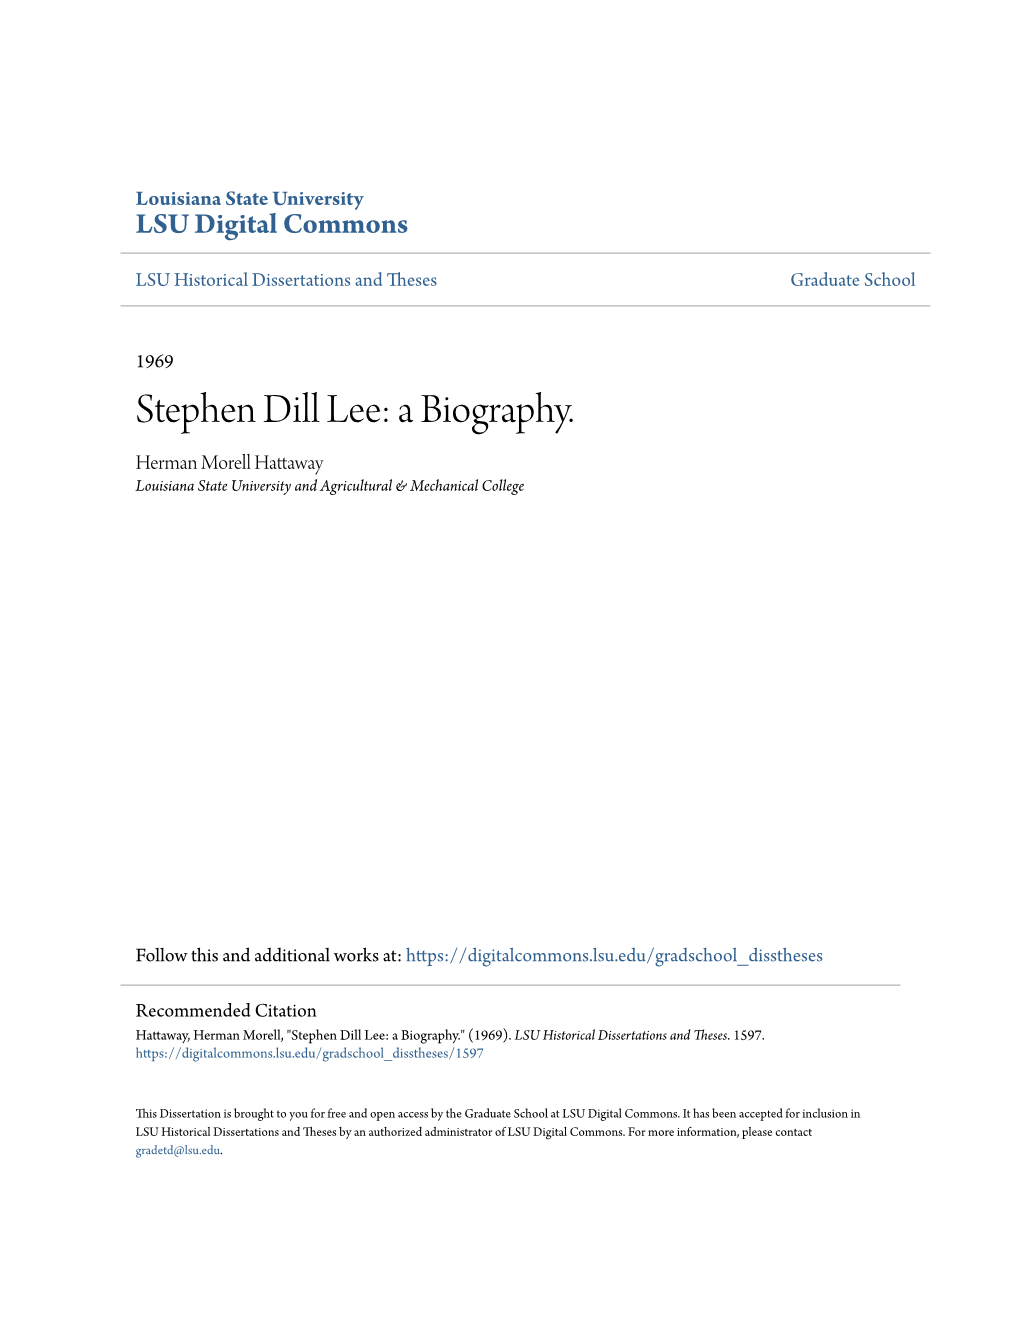 Stephen Dill Lee: a Biography